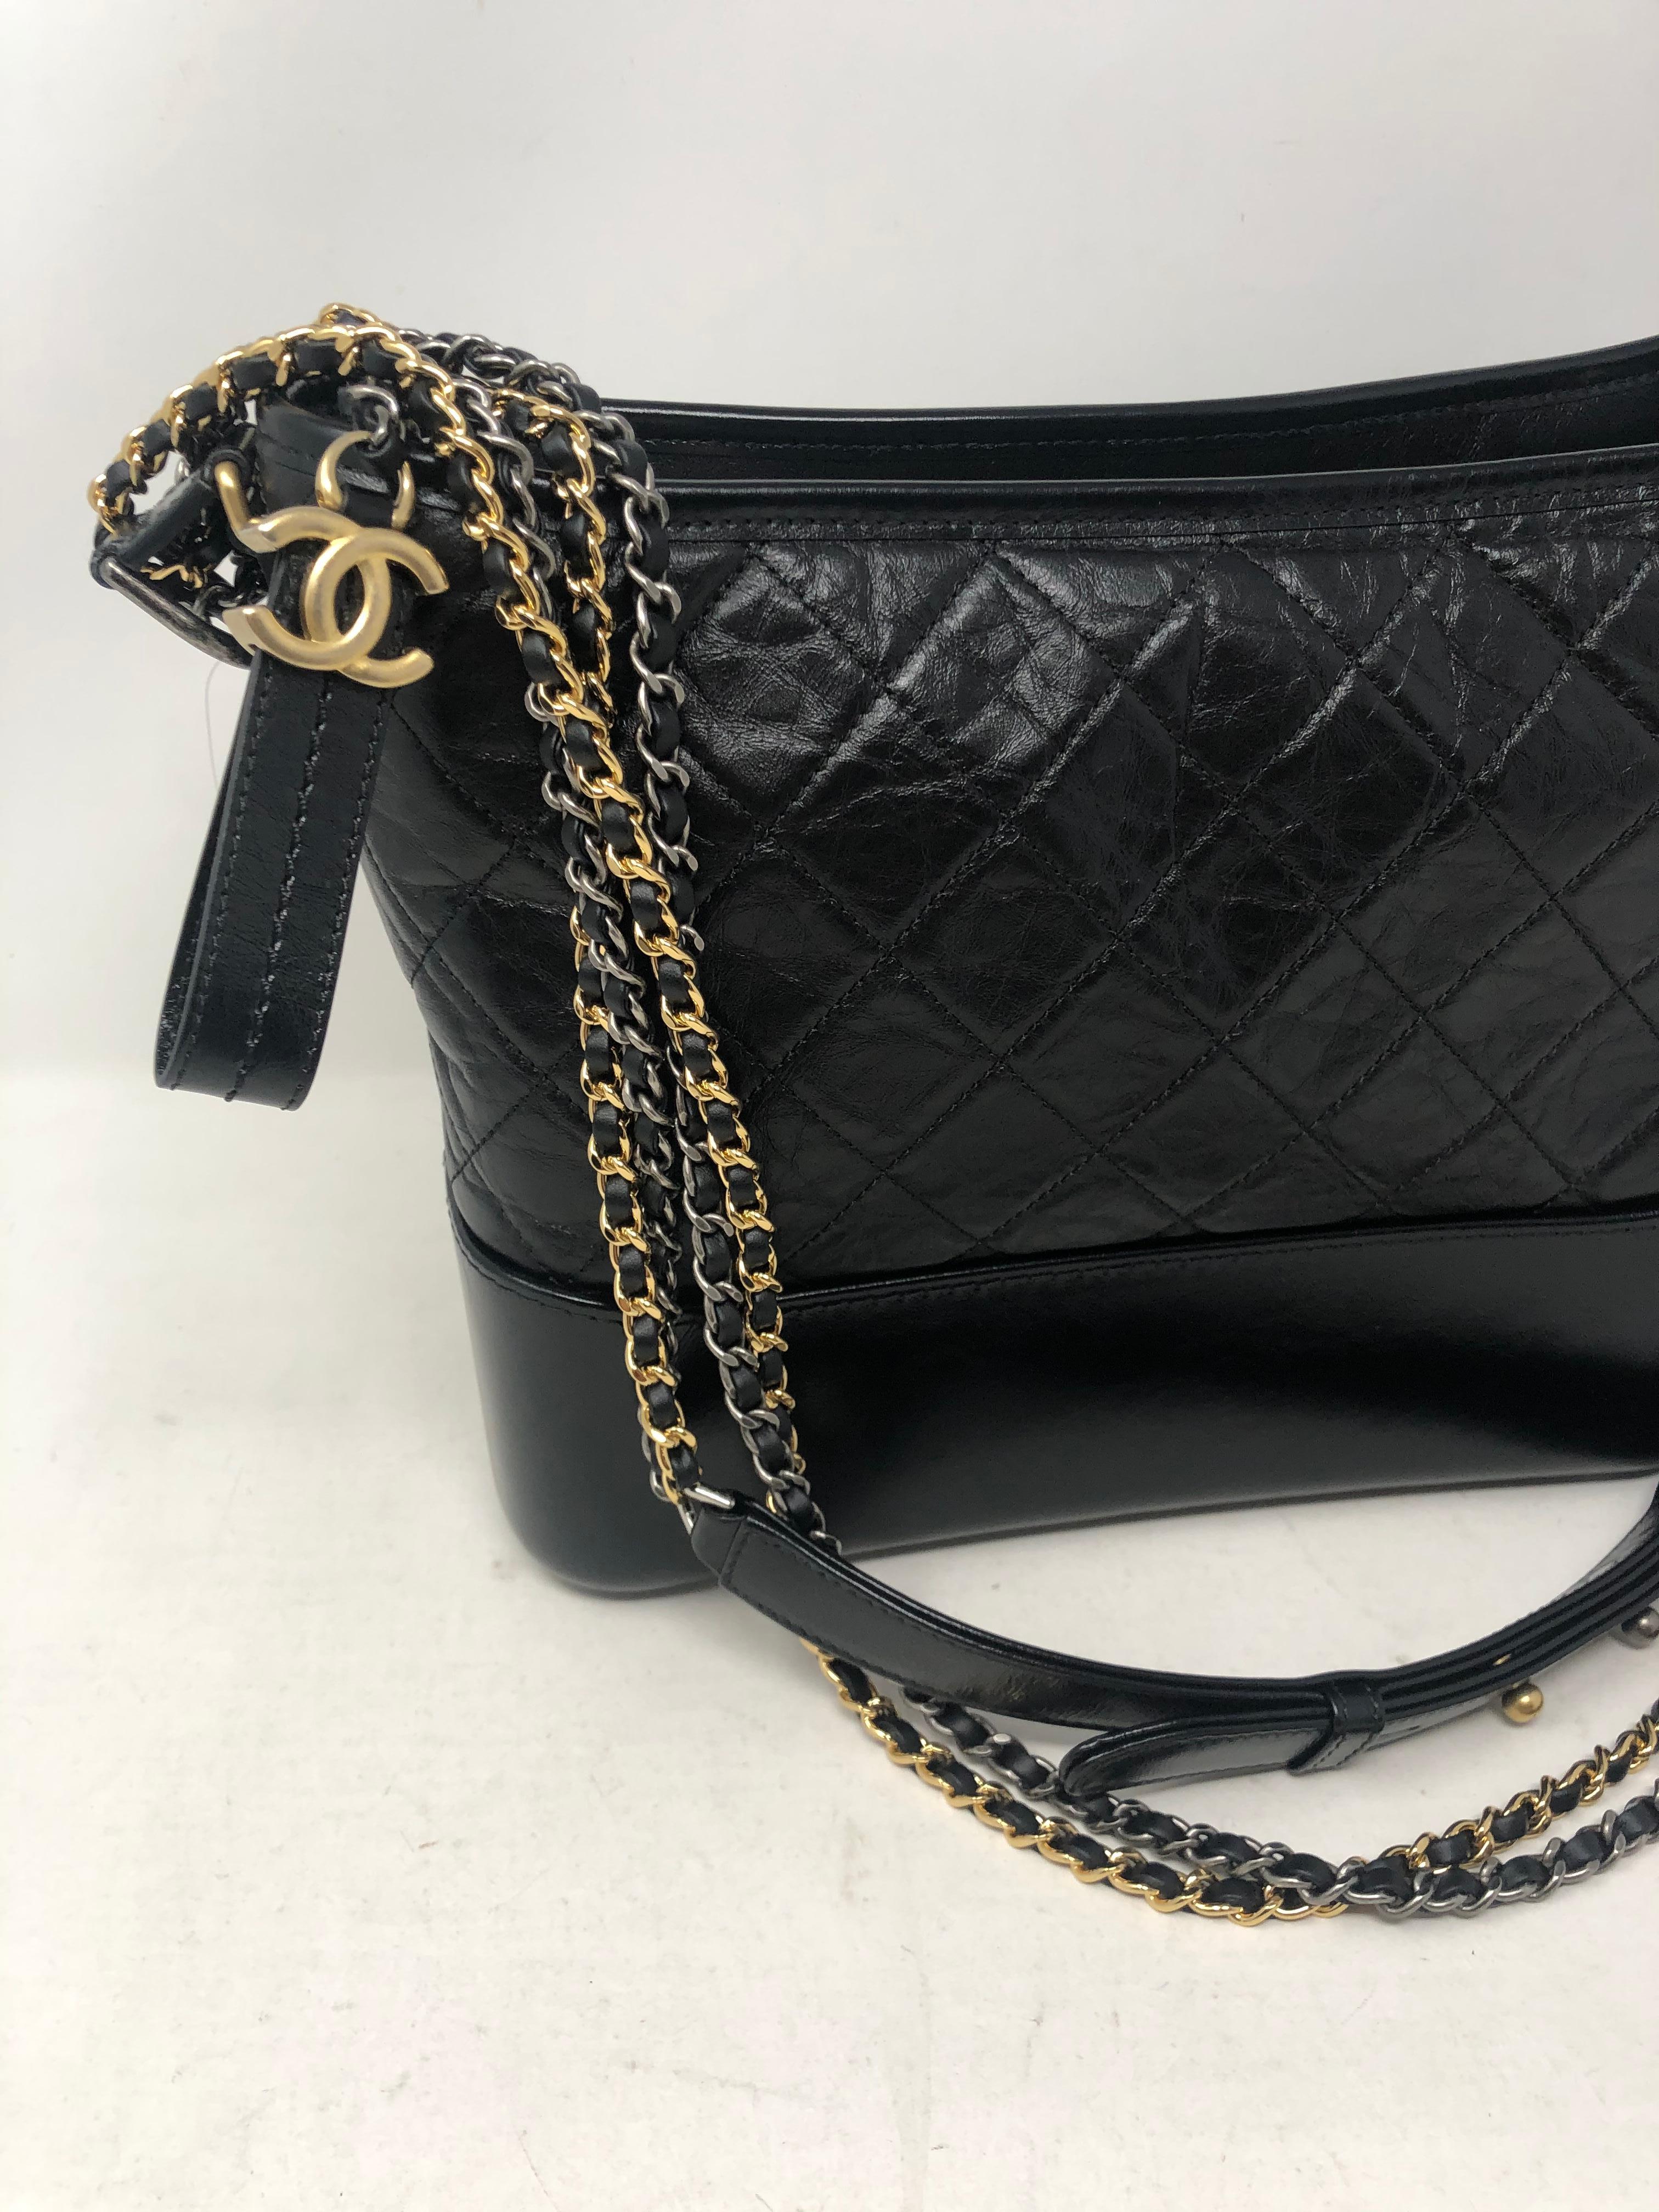 Chanel Gabrielle Bag. Brand new. Never worn. Limited and rare style. Can be worn multiple ways. Authenticity card and dust cover included. Guaranteed authentic. 